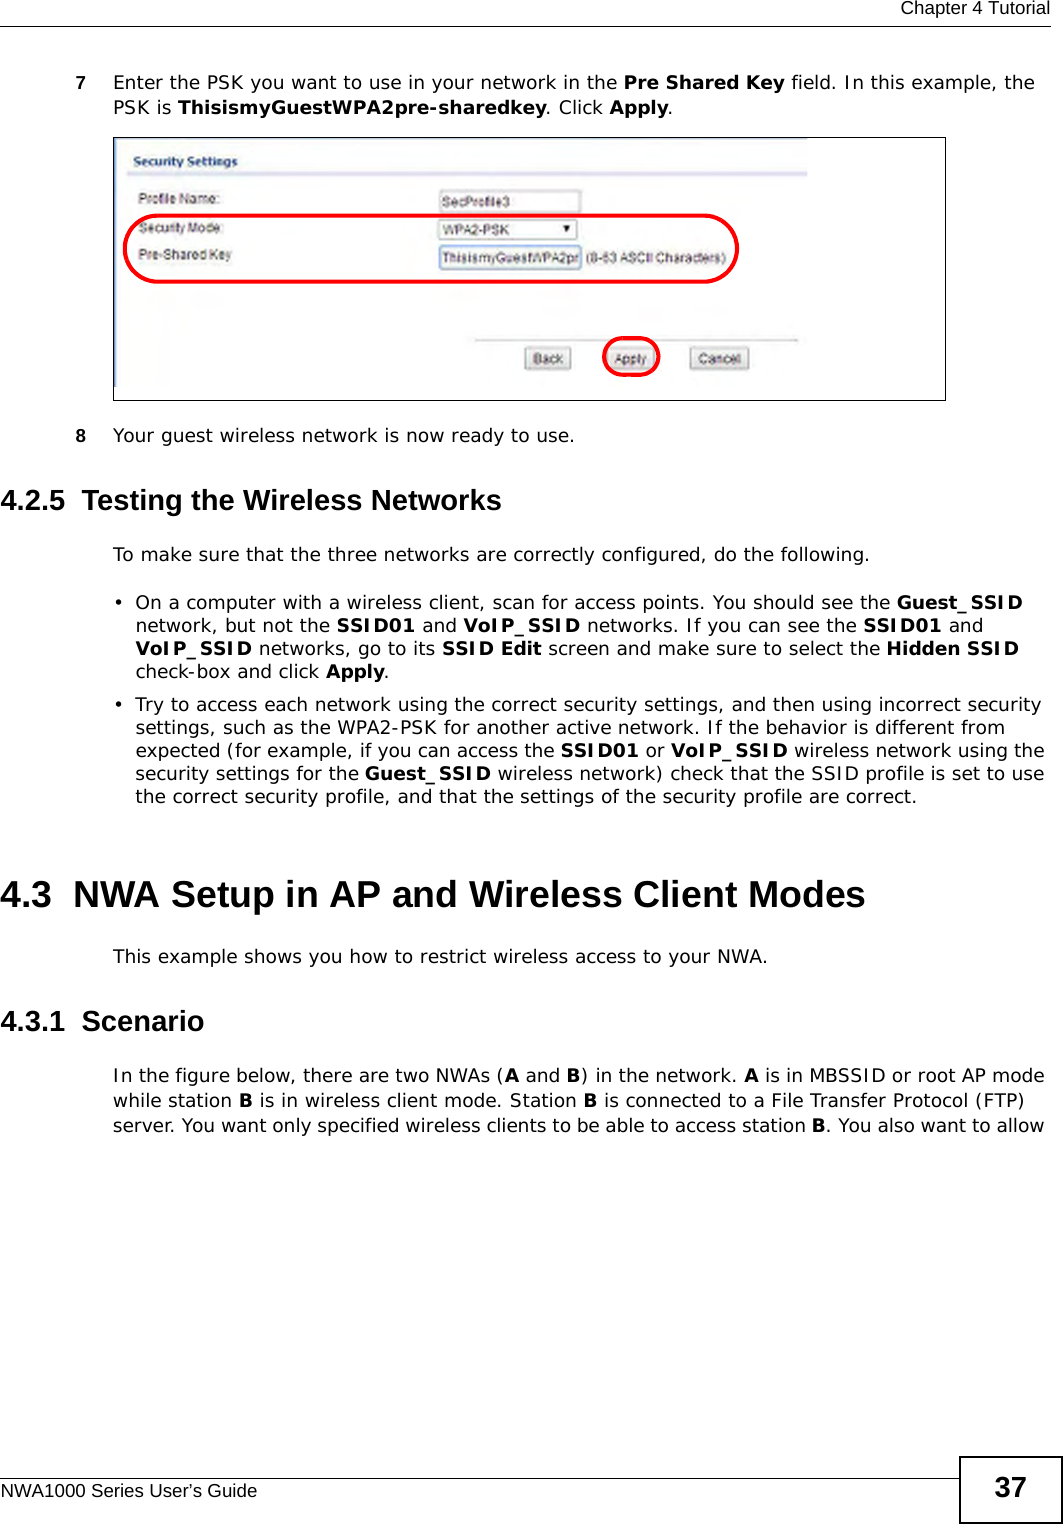  Chapter 4 TutorialNWA1000 Series User’s Guide 377Enter the PSK you want to use in your network in the Pre Shared Key field. In this example, the PSK is ThisismyGuestWPA2pre-sharedkey. Click Apply. 8Your guest wireless network is now ready to use.4.2.5  Testing the Wireless NetworksTo make sure that the three networks are correctly configured, do the following.• On a computer with a wireless client, scan for access points. You should see the Guest_SSID network, but not the SSID01 and VoIP_SSID networks. If you can see the SSID01 and VoIP_SSID networks, go to its SSID Edit screen and make sure to select the Hidden SSID check-box and click Apply.• Try to access each network using the correct security settings, and then using incorrect security settings, such as the WPA2-PSK for another active network. If the behavior is different from expected (for example, if you can access the SSID01 or VoIP_SSID wireless network using the security settings for the Guest_SSID wireless network) check that the SSID profile is set to use the correct security profile, and that the settings of the security profile are correct.4.3  NWA Setup in AP and Wireless Client ModesThis example shows you how to restrict wireless access to your NWA.4.3.1  ScenarioIn the figure below, there are two NWAs (A and B) in the network. A is in MBSSID or root AP mode while station B is in wireless client mode. Station B is connected to a File Transfer Protocol (FTP) server. You want only specified wireless clients to be able to access station B. You also want to allow 